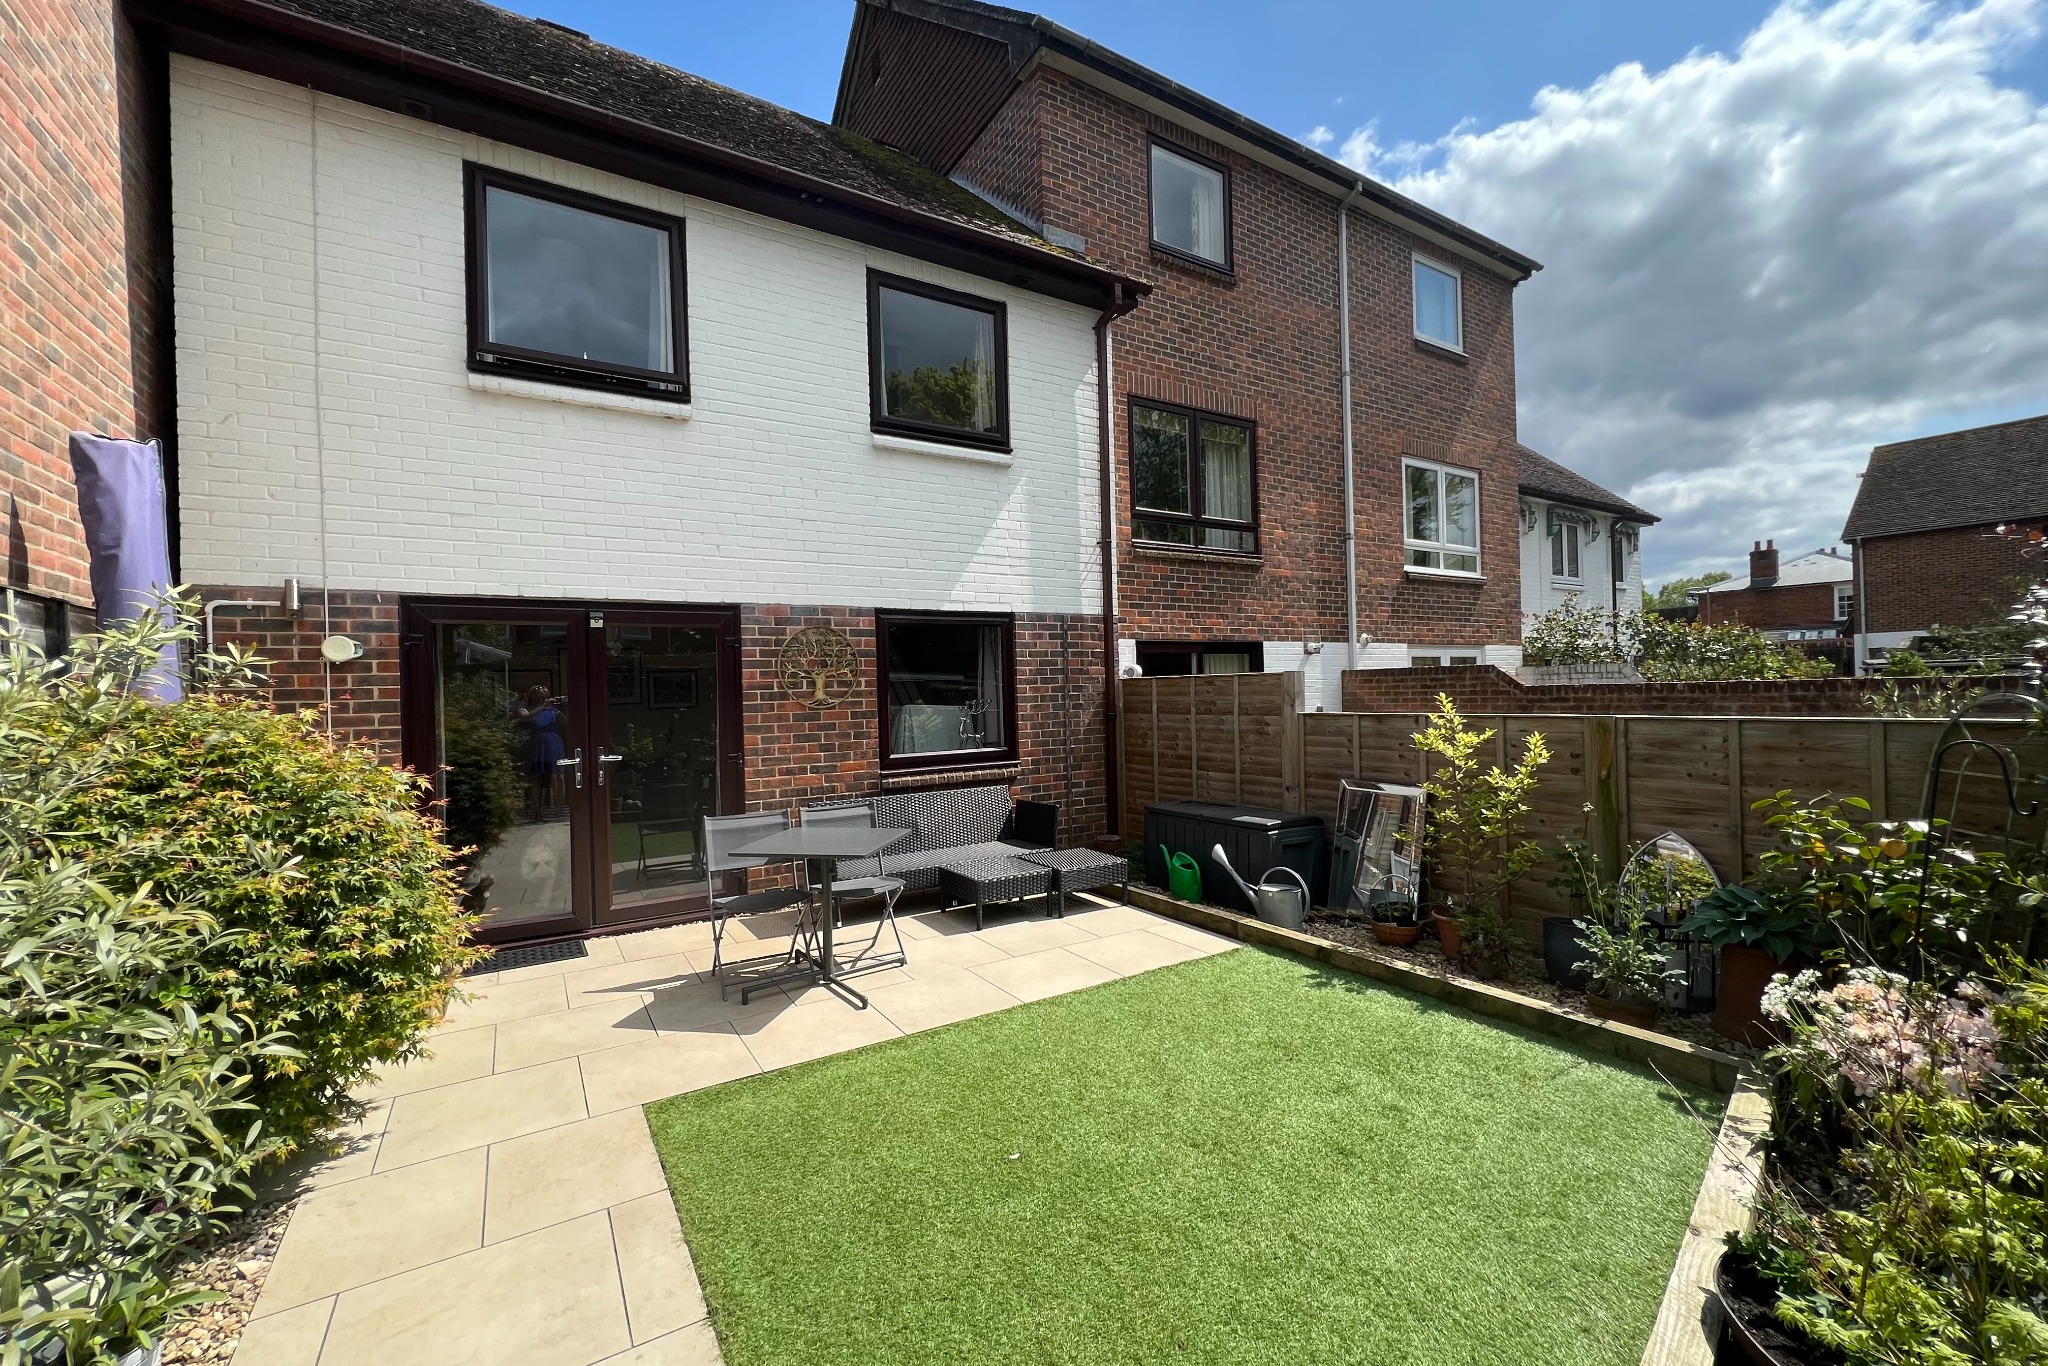 3 bed terraced house for sale in Bishop's Waltham, Southampton - Property Image 1